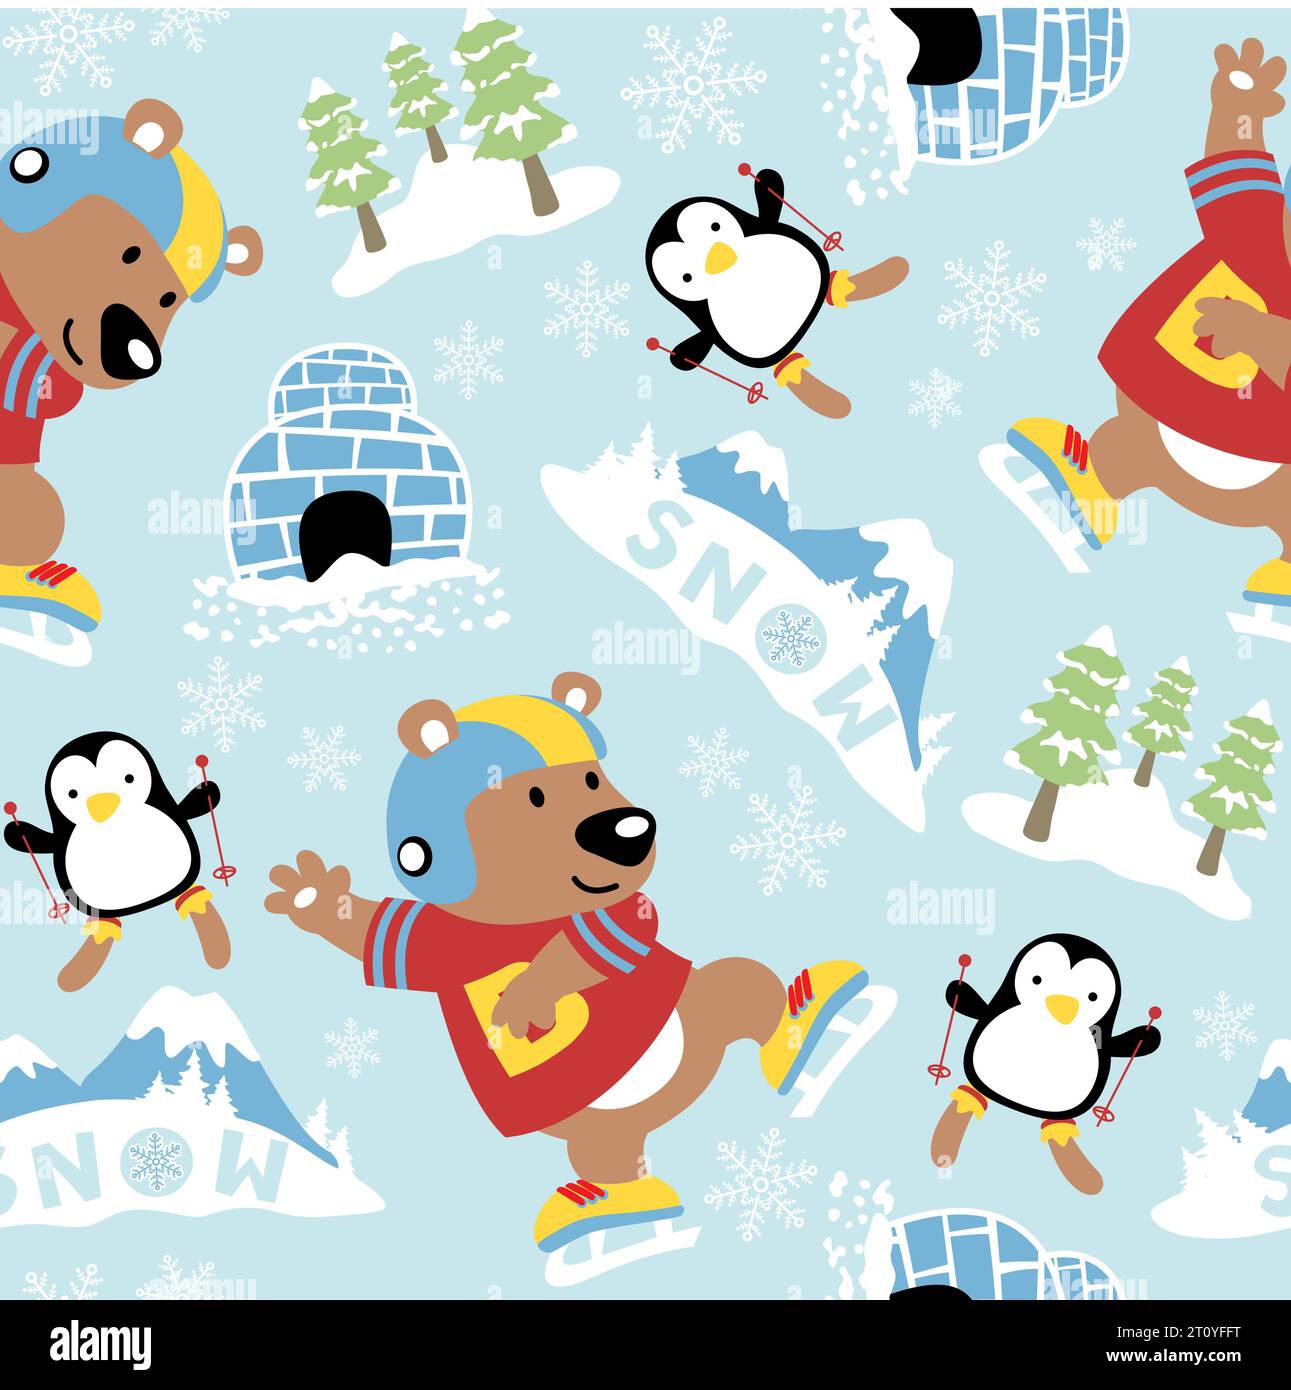 seamless pattern vector of funny bear playing ice skating with penguin skiing, cartoon winter elements Stock Vector